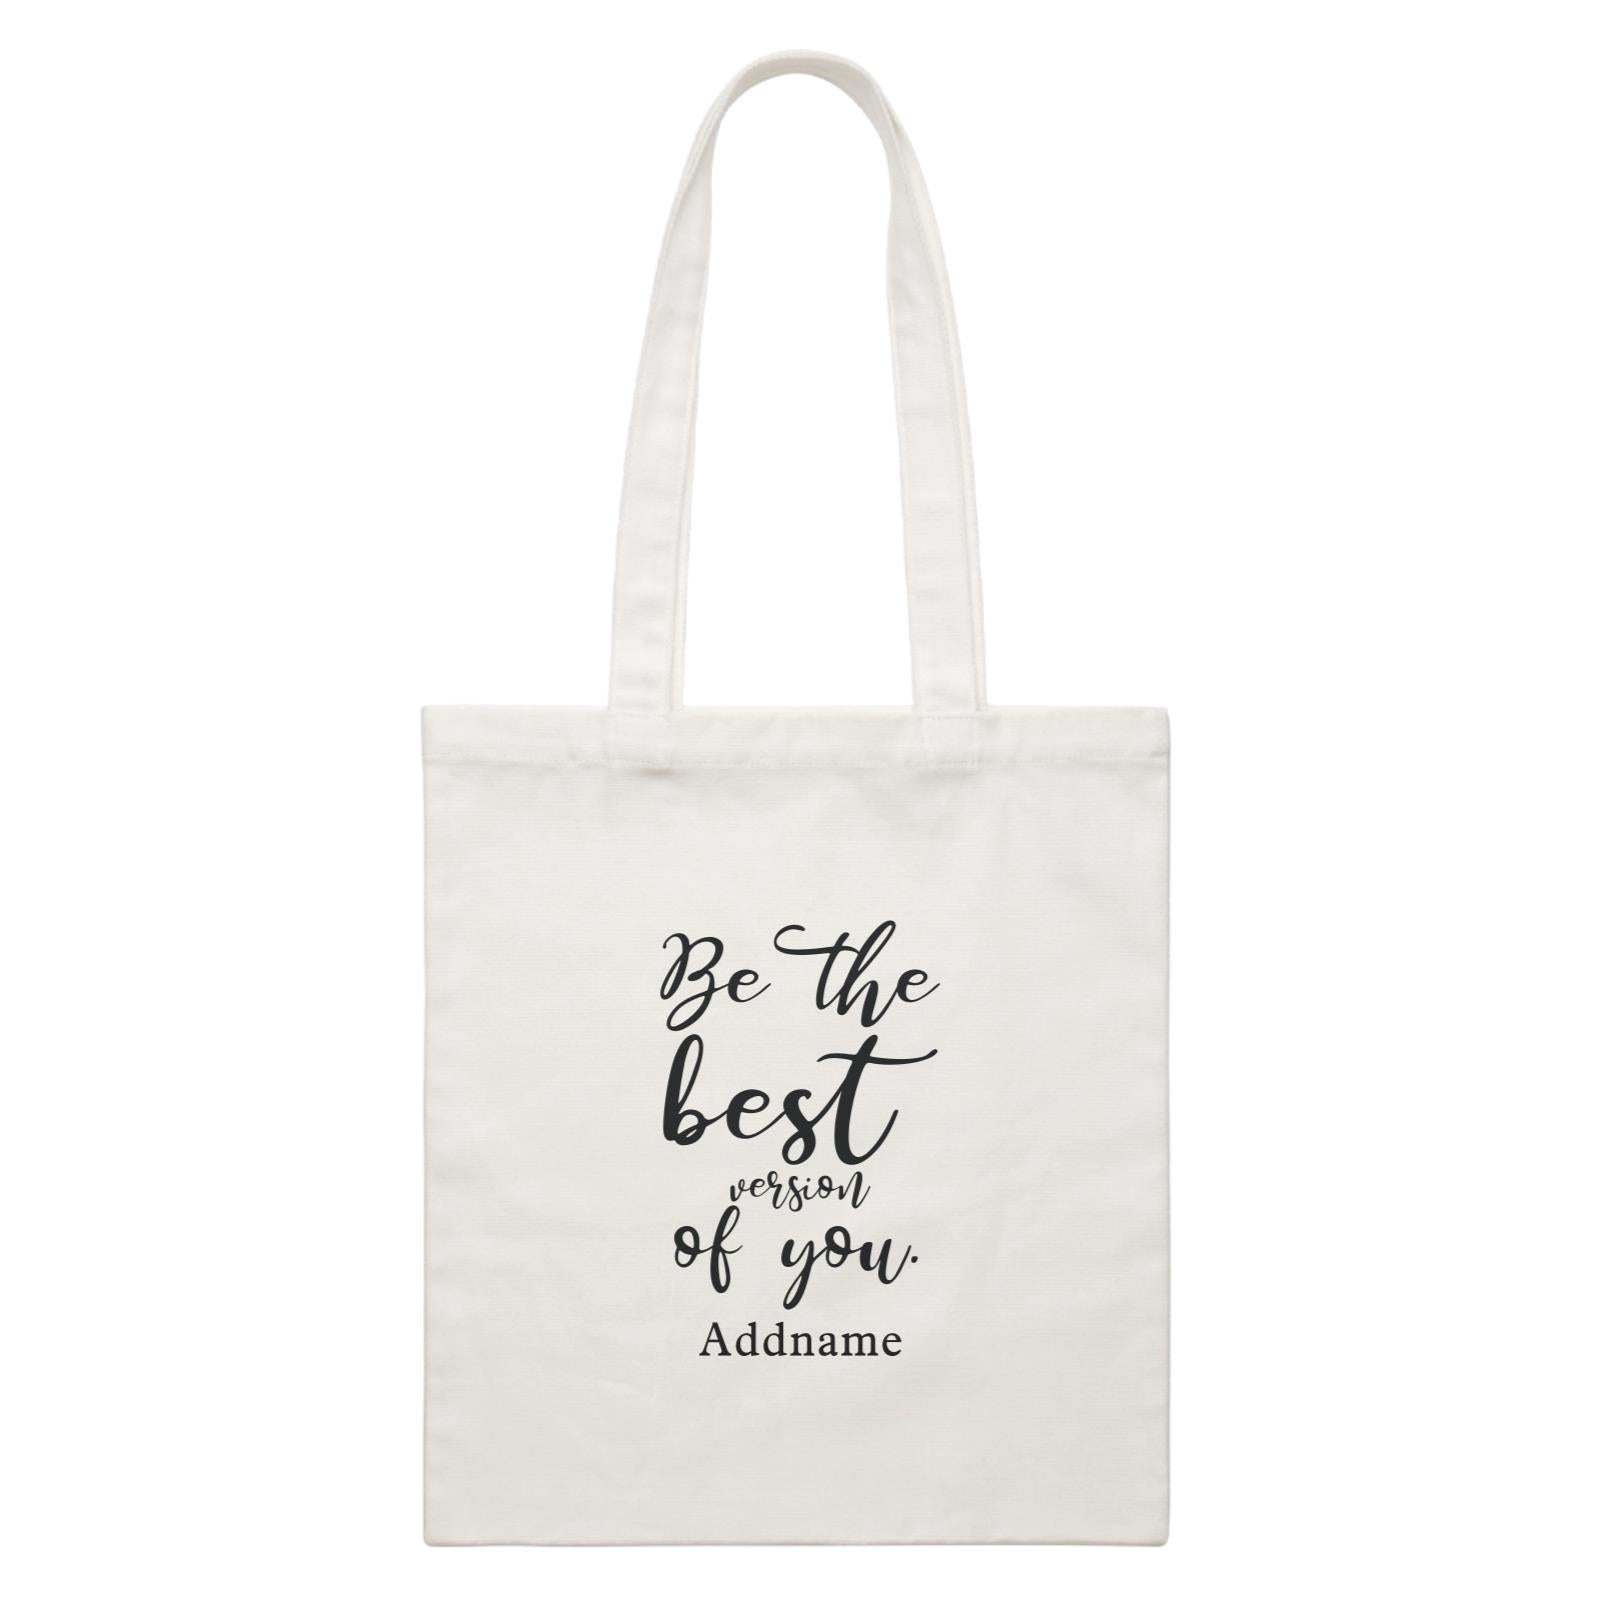 Inspiration Quotes Be The Best Version Of You Addname White Canvas Bag